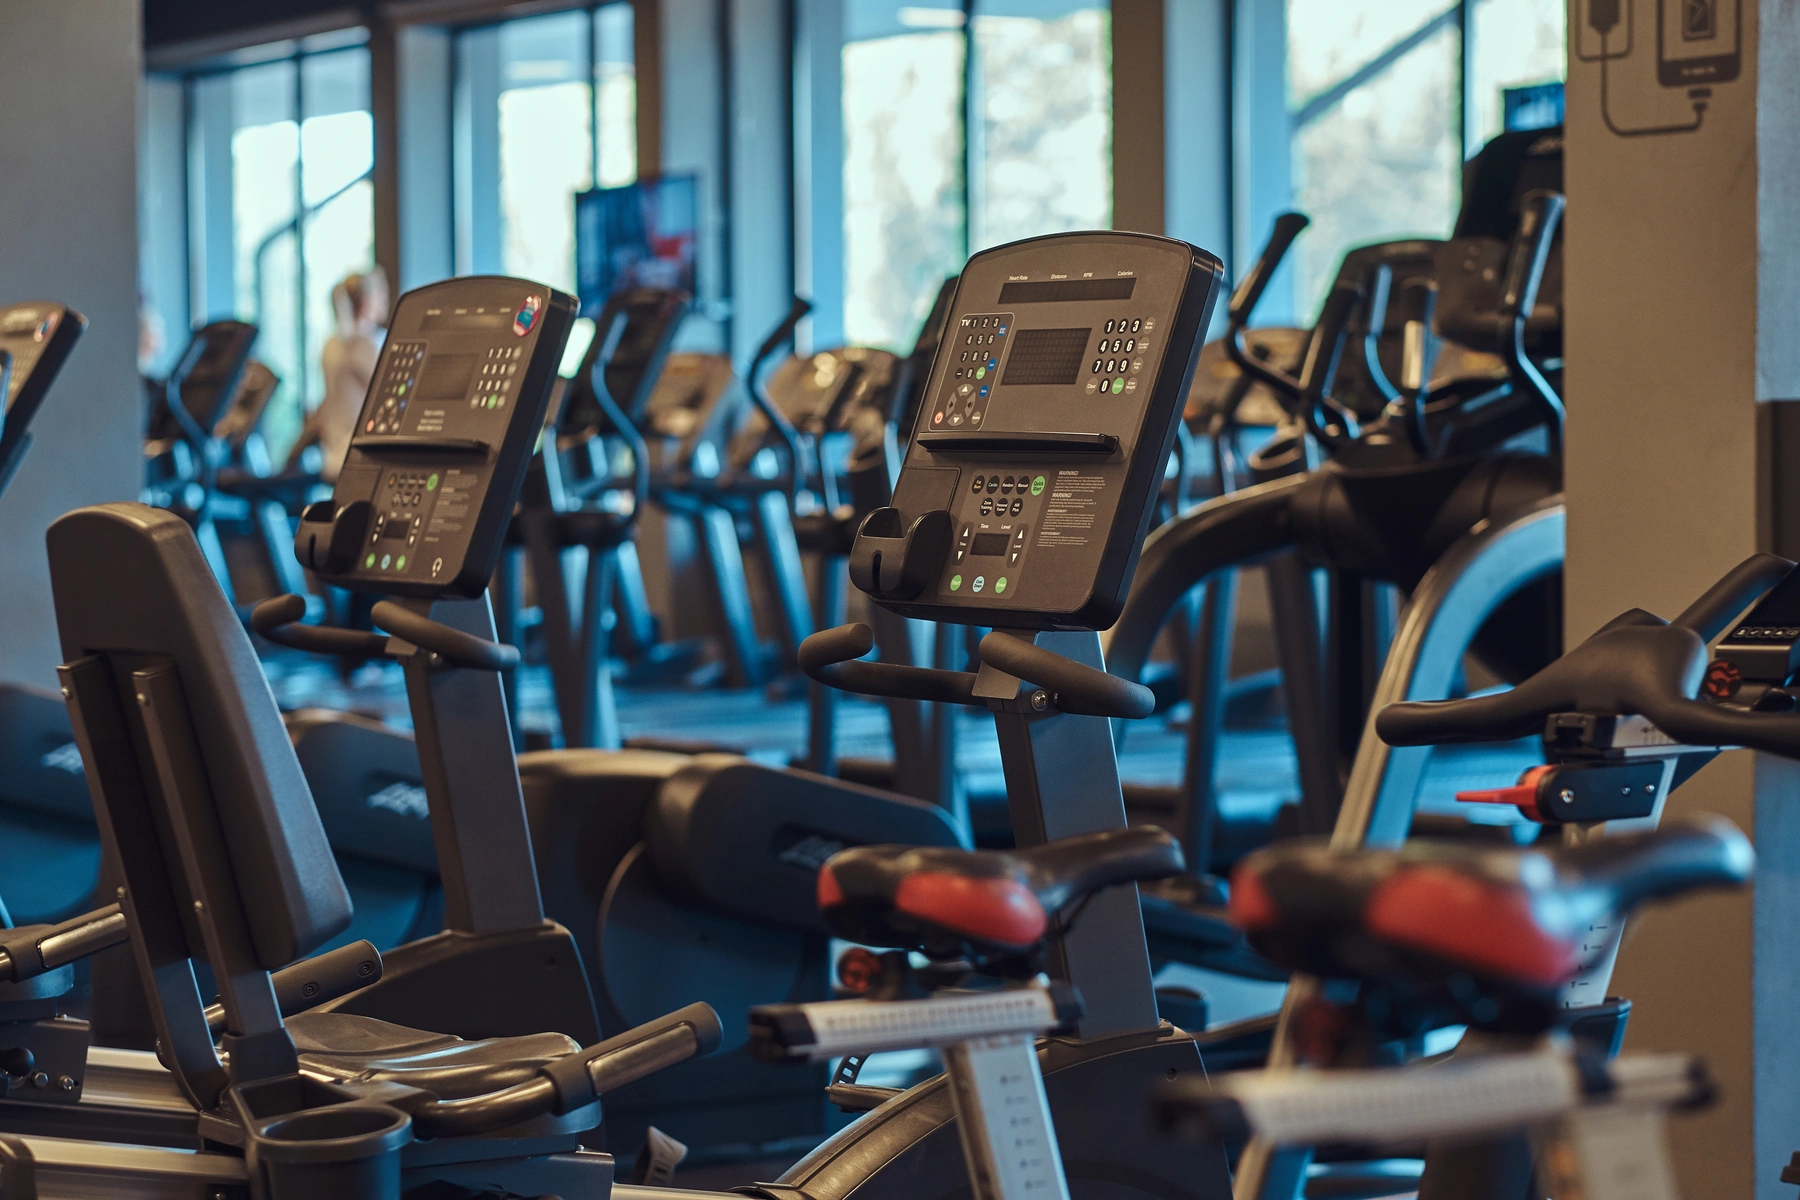 Modern sports equipment in a fitness center